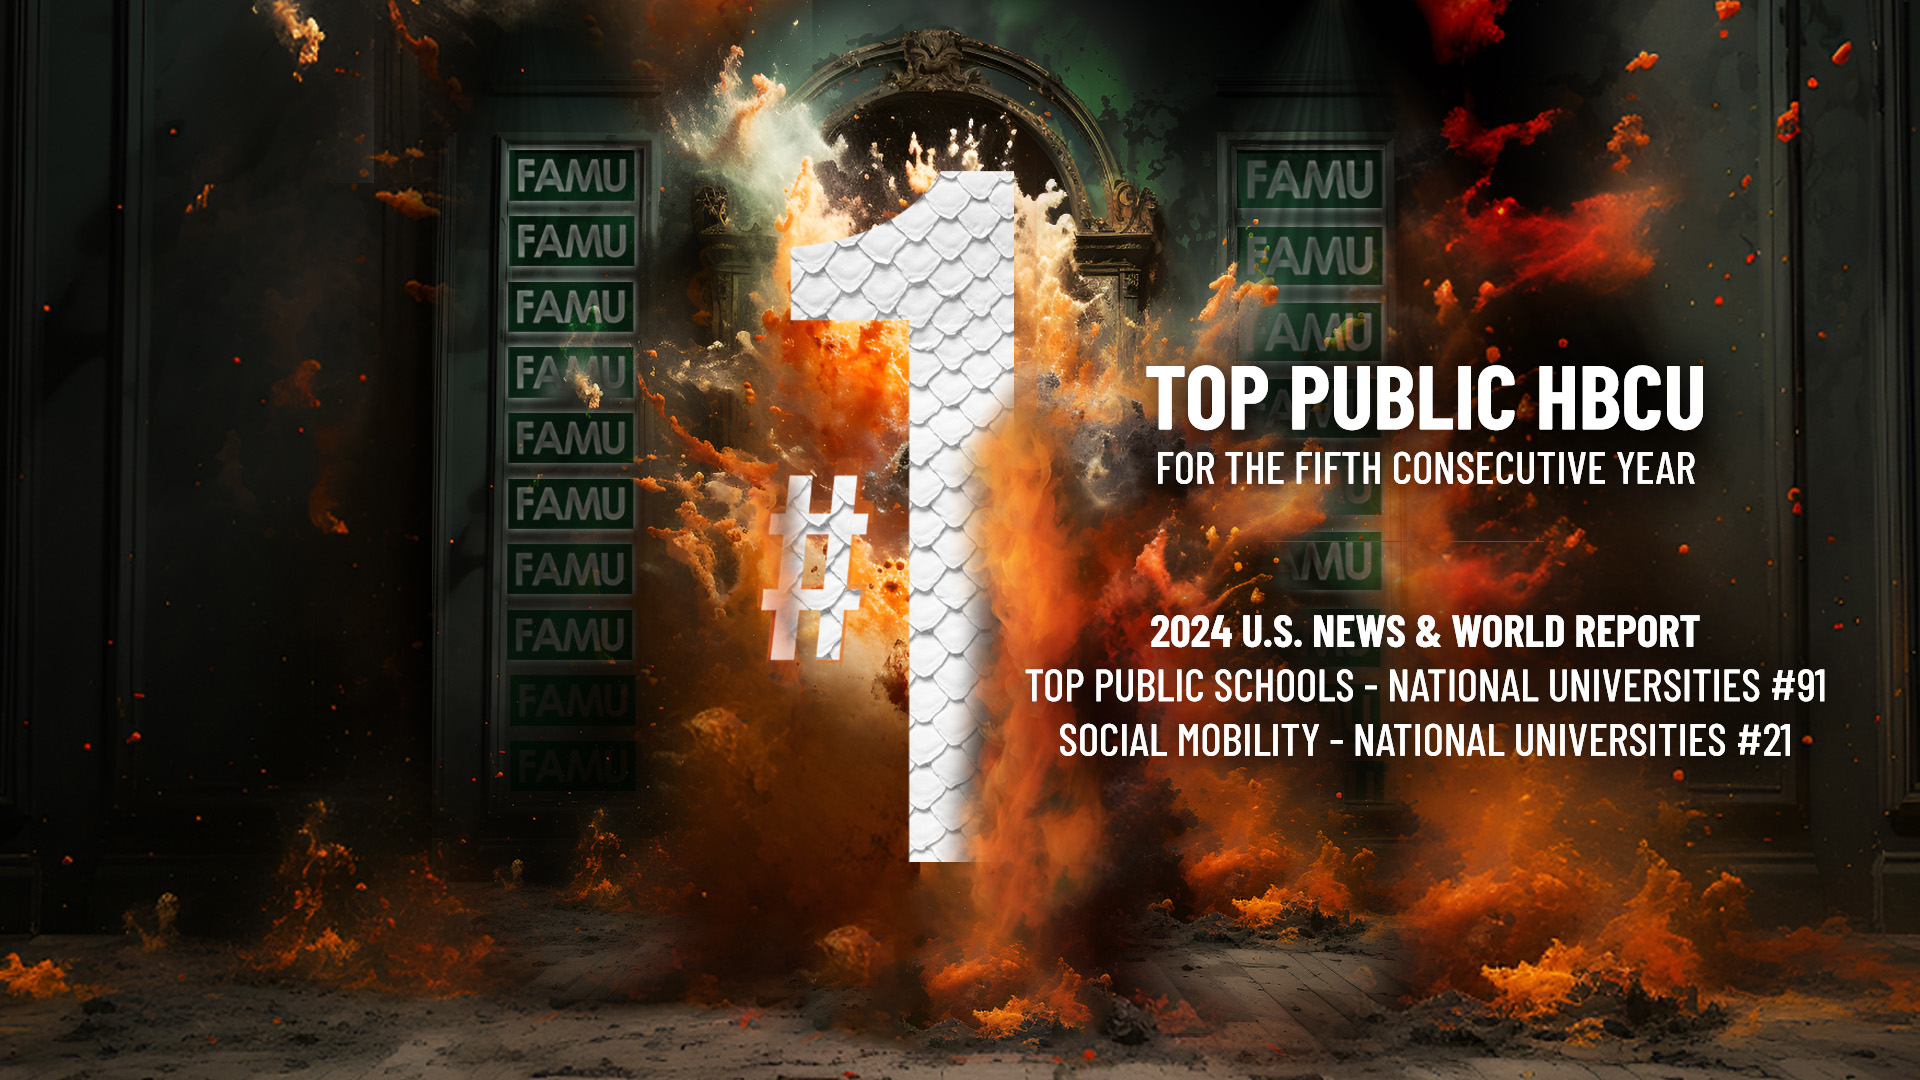 Top Public HBCU for the 5th Consecutive Year!